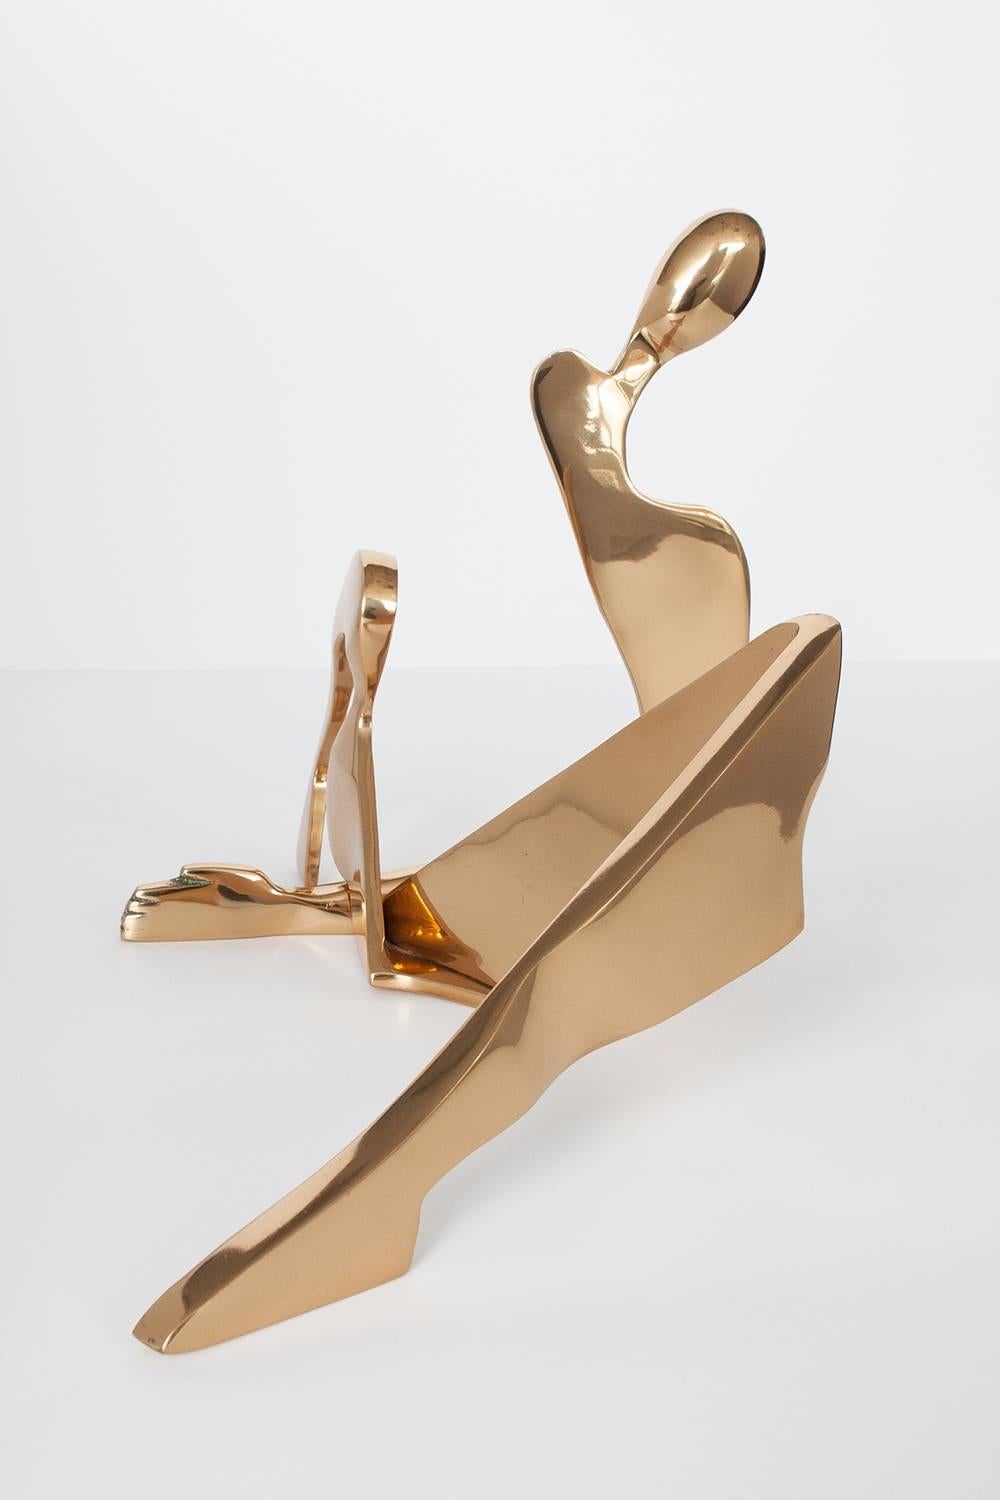 Polished Brass Abstract Reclining Nude Sculpture by Eichengreen & Gensburg